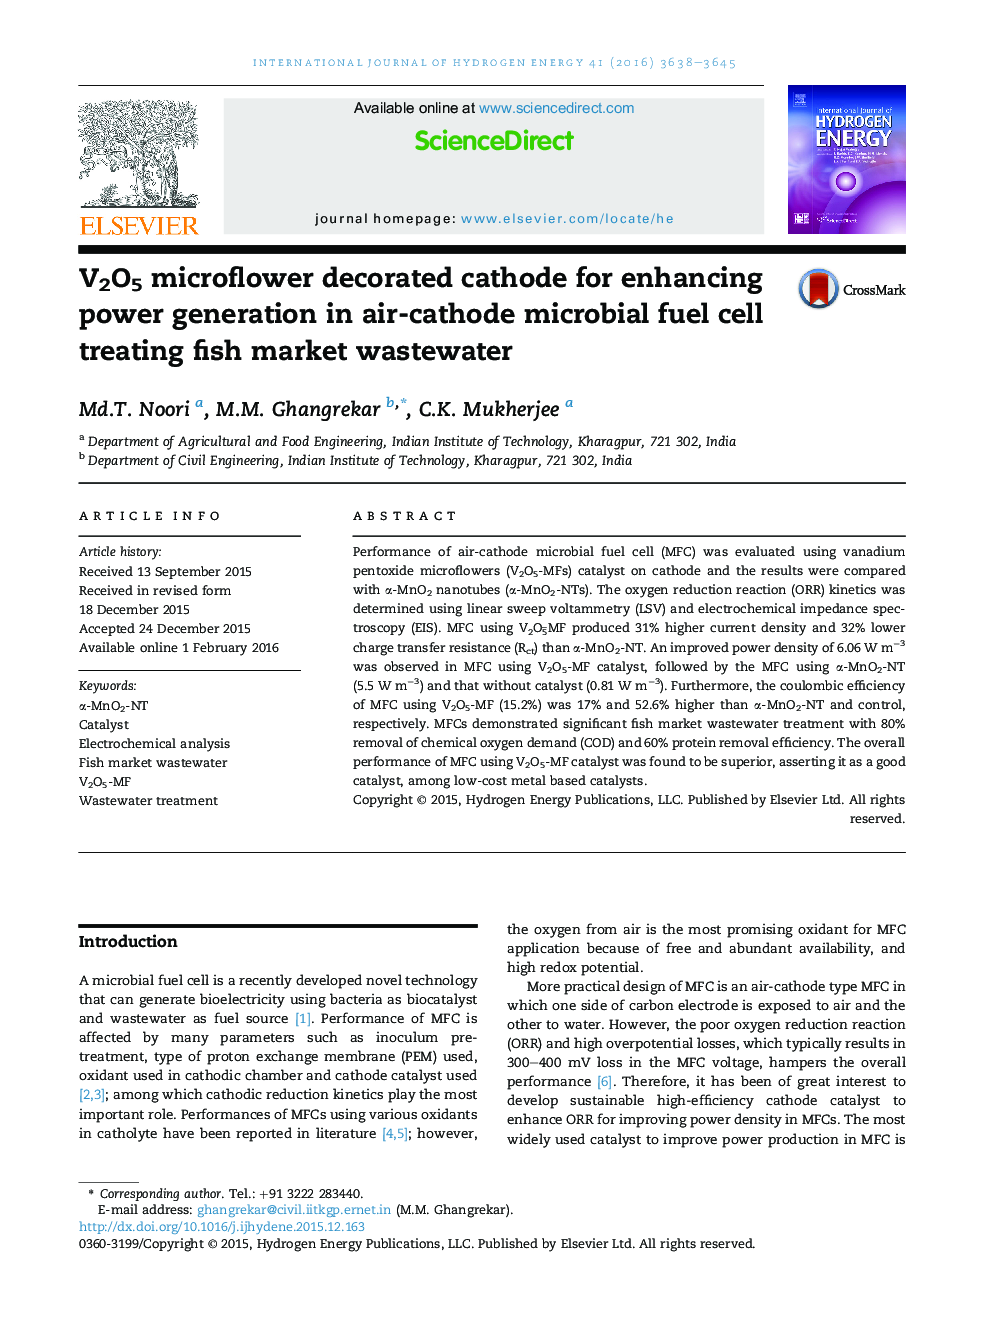 V2O5 microflower decorated cathode for enhancing power generation in air-cathode microbial fuel cell treating fish market wastewater